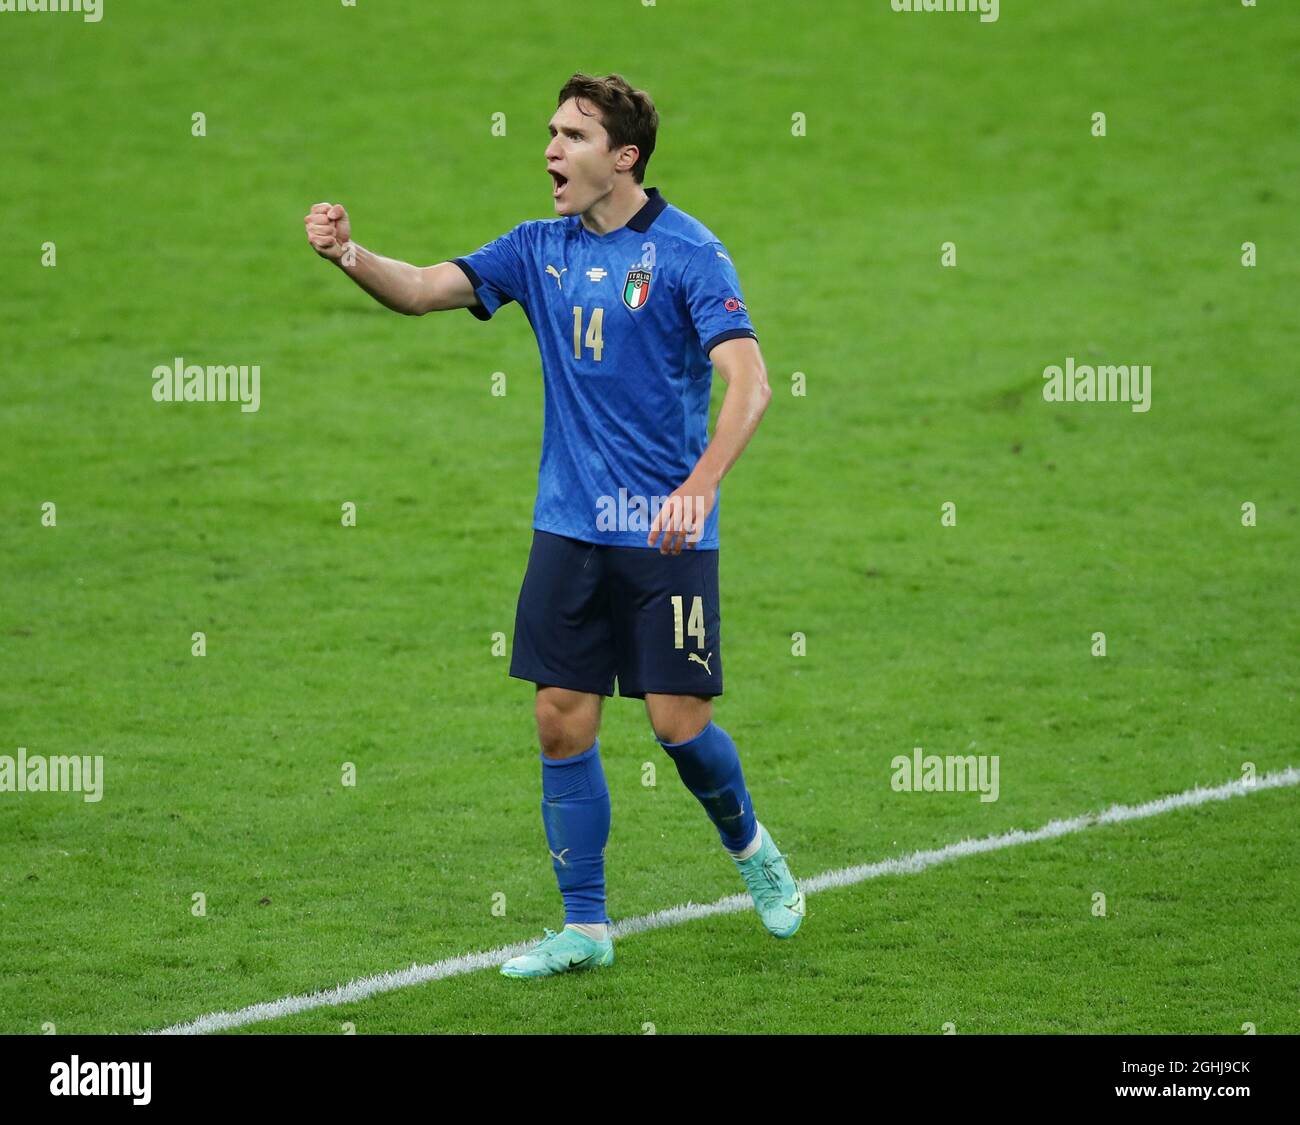 London, England, 6th July 2021. Federico Chiesa of Italy celebrates scoring the first goal during the UEFA Euro 2020 match at Wembley Stadium, London. Picture credit should read: David Klein / Sportimage via PA Images Stock Photo